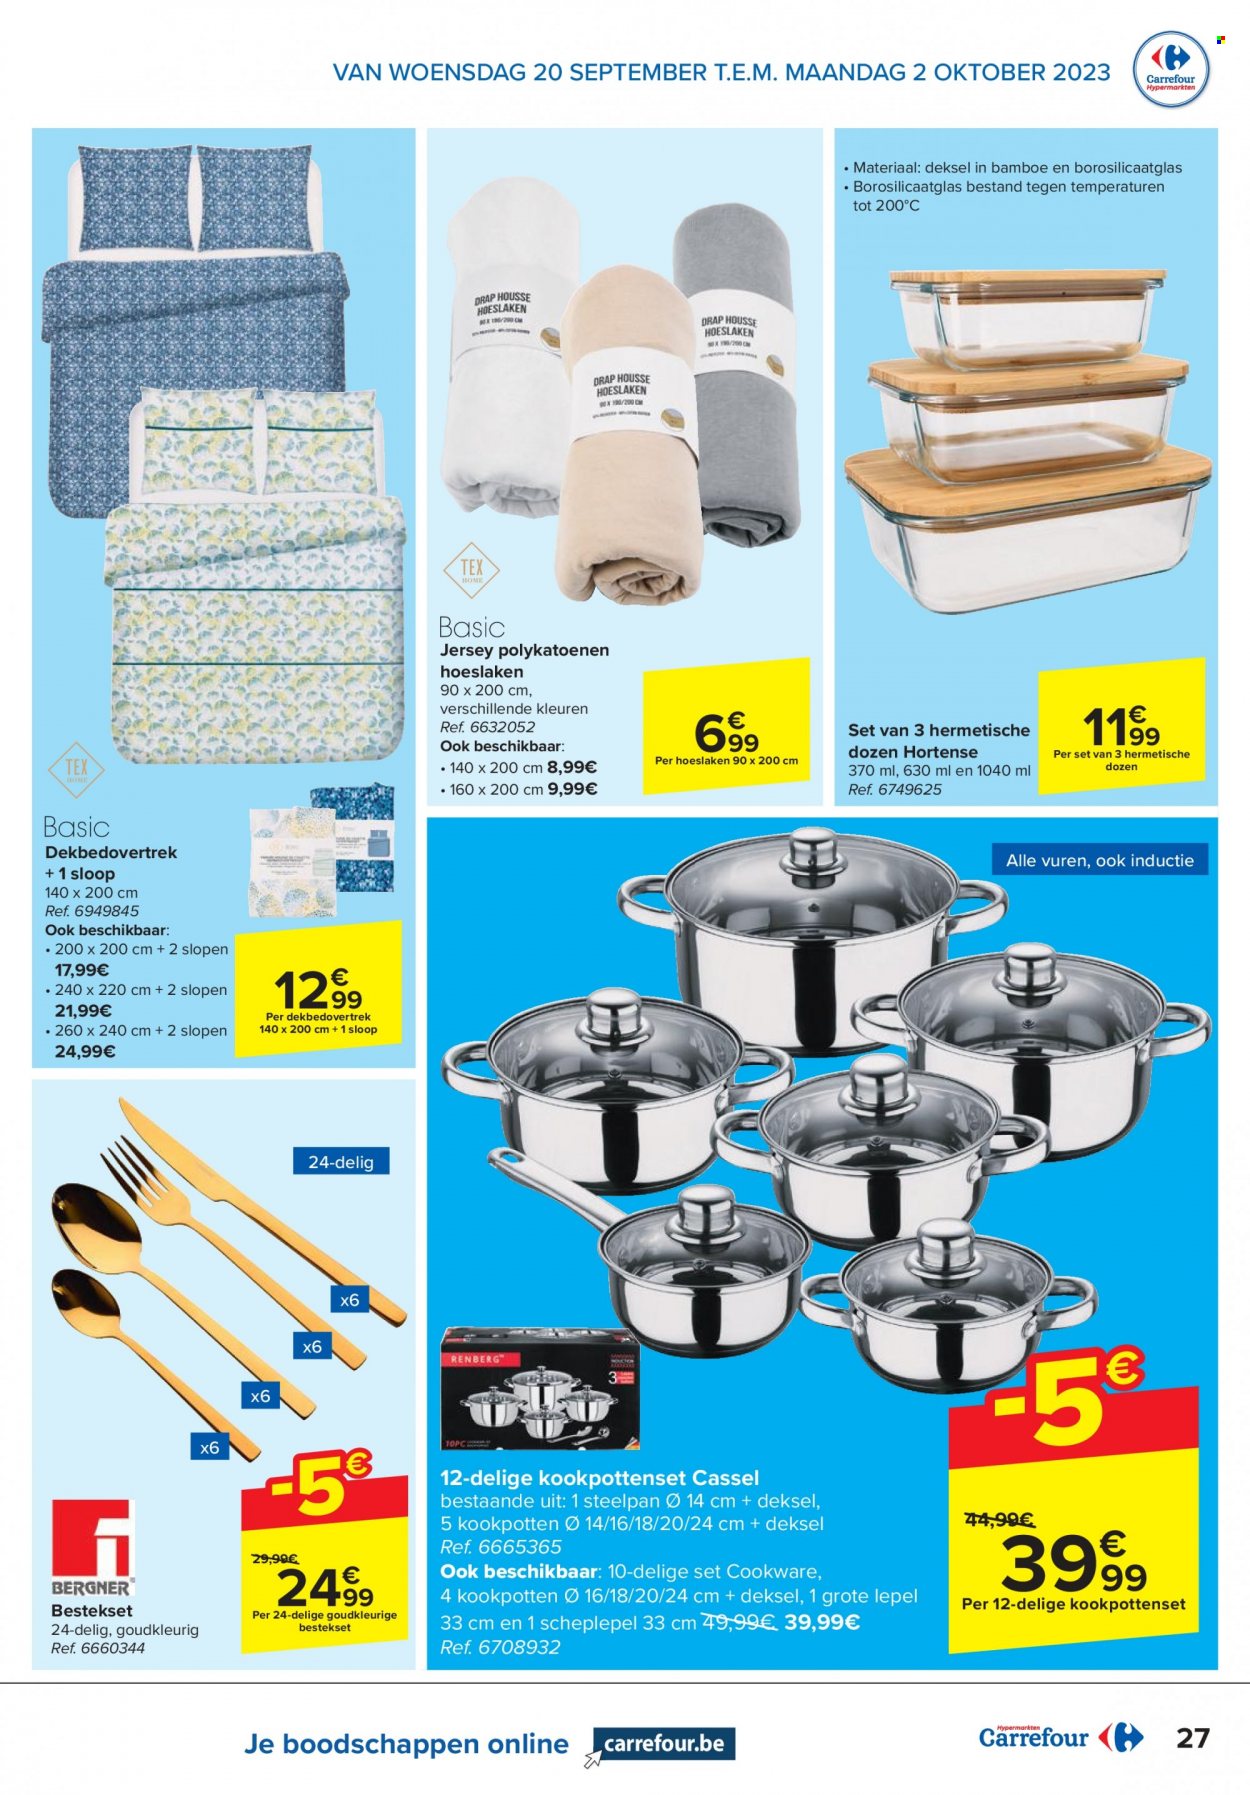 Catalogue Carrefour hypermarkt - 20.9.2023 - 2.10.2023. Page 27.